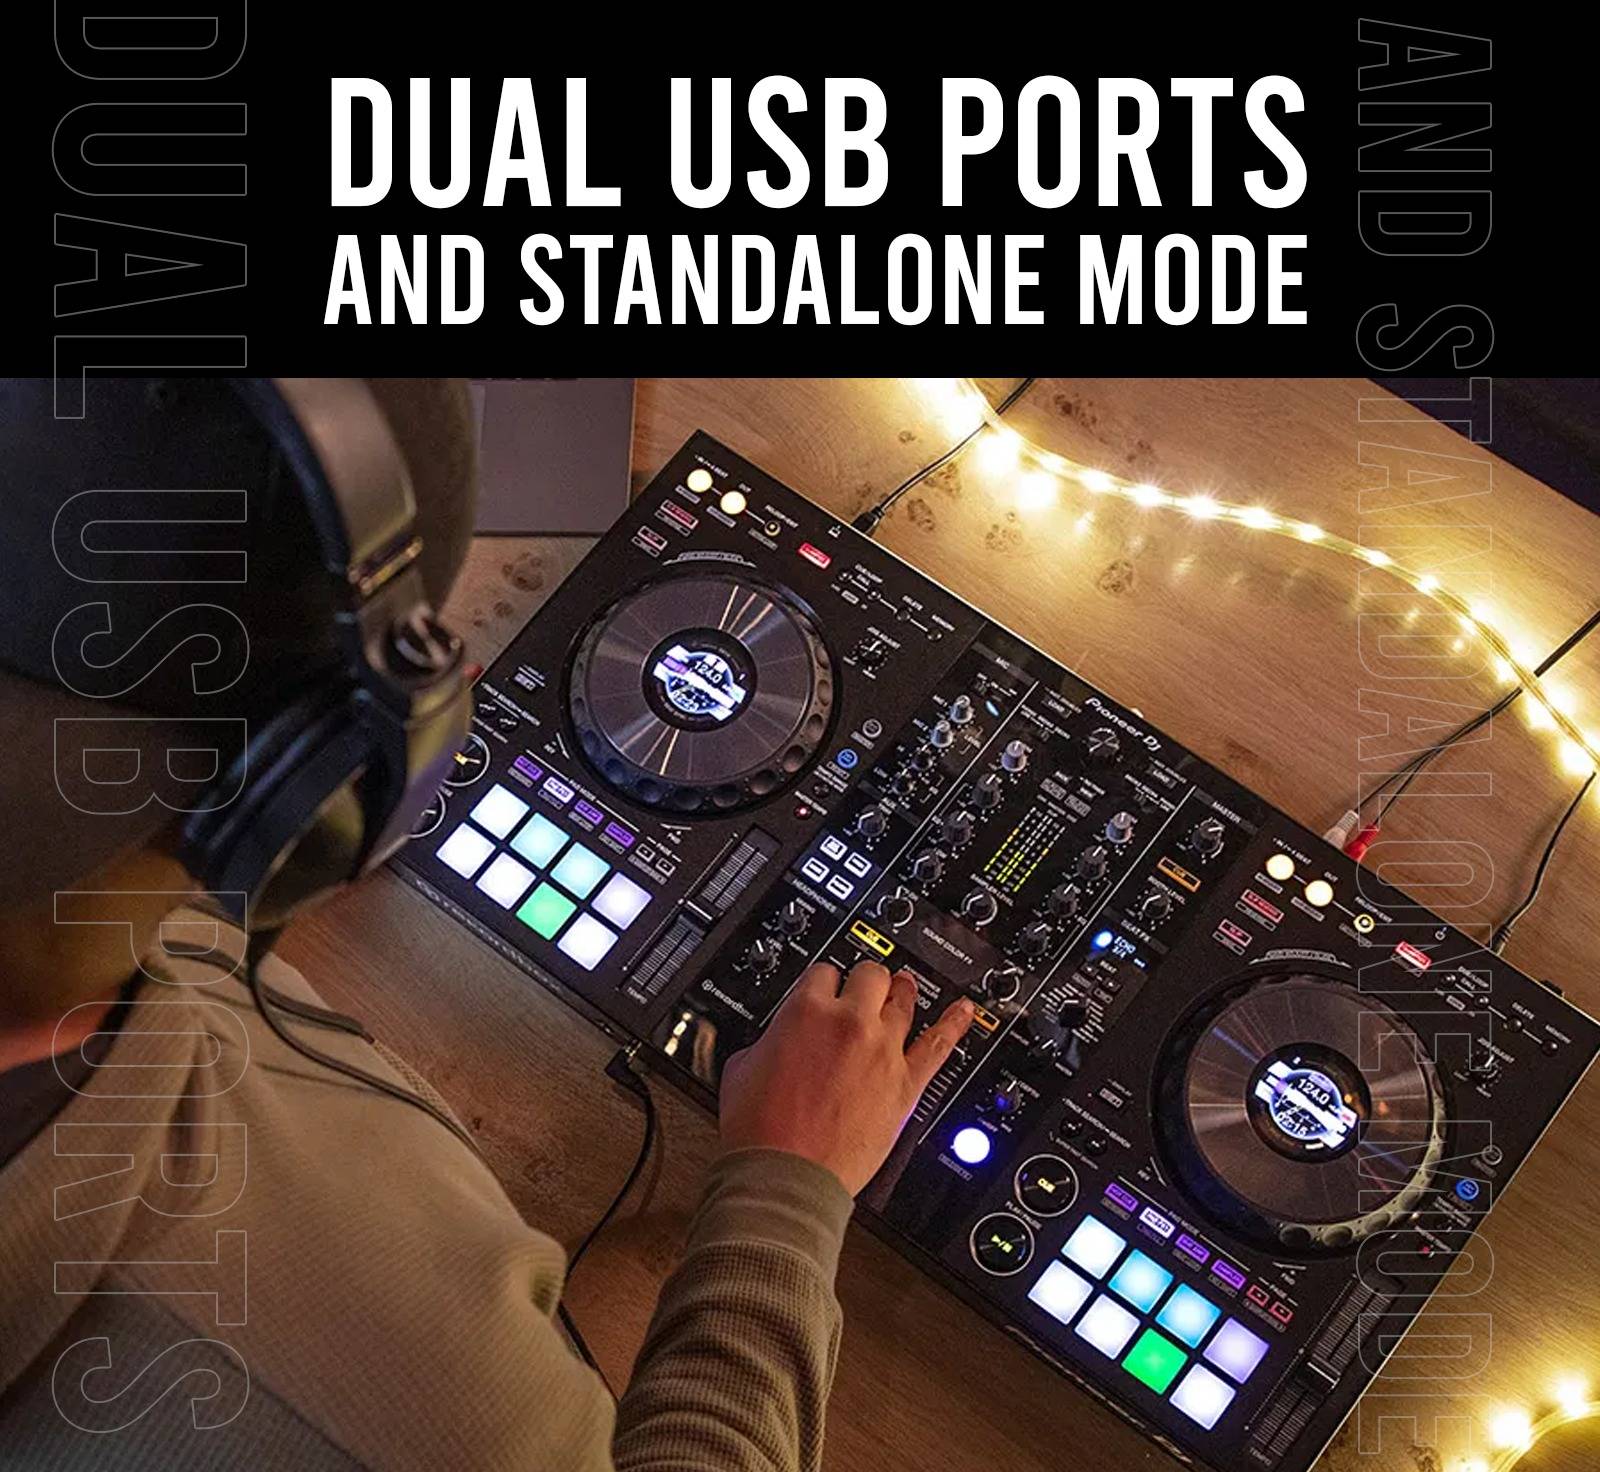 Dual USB Ports and Standalone Mode